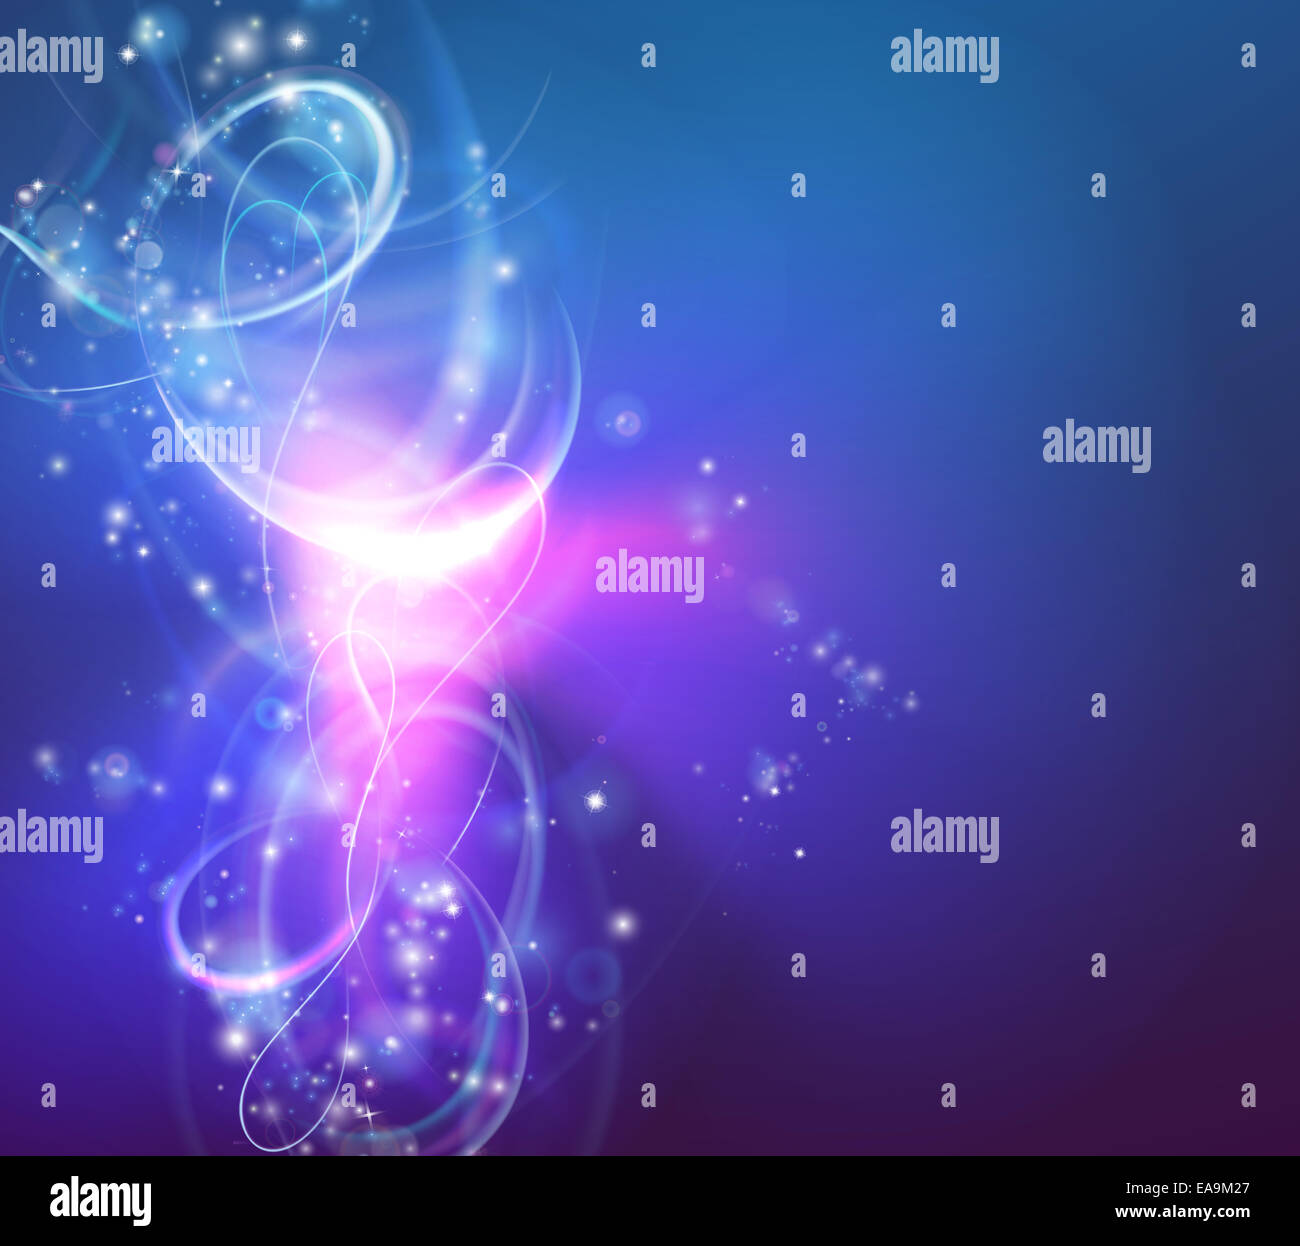 A modern abstract light swirl background with electric vortex shapes Stock Photo